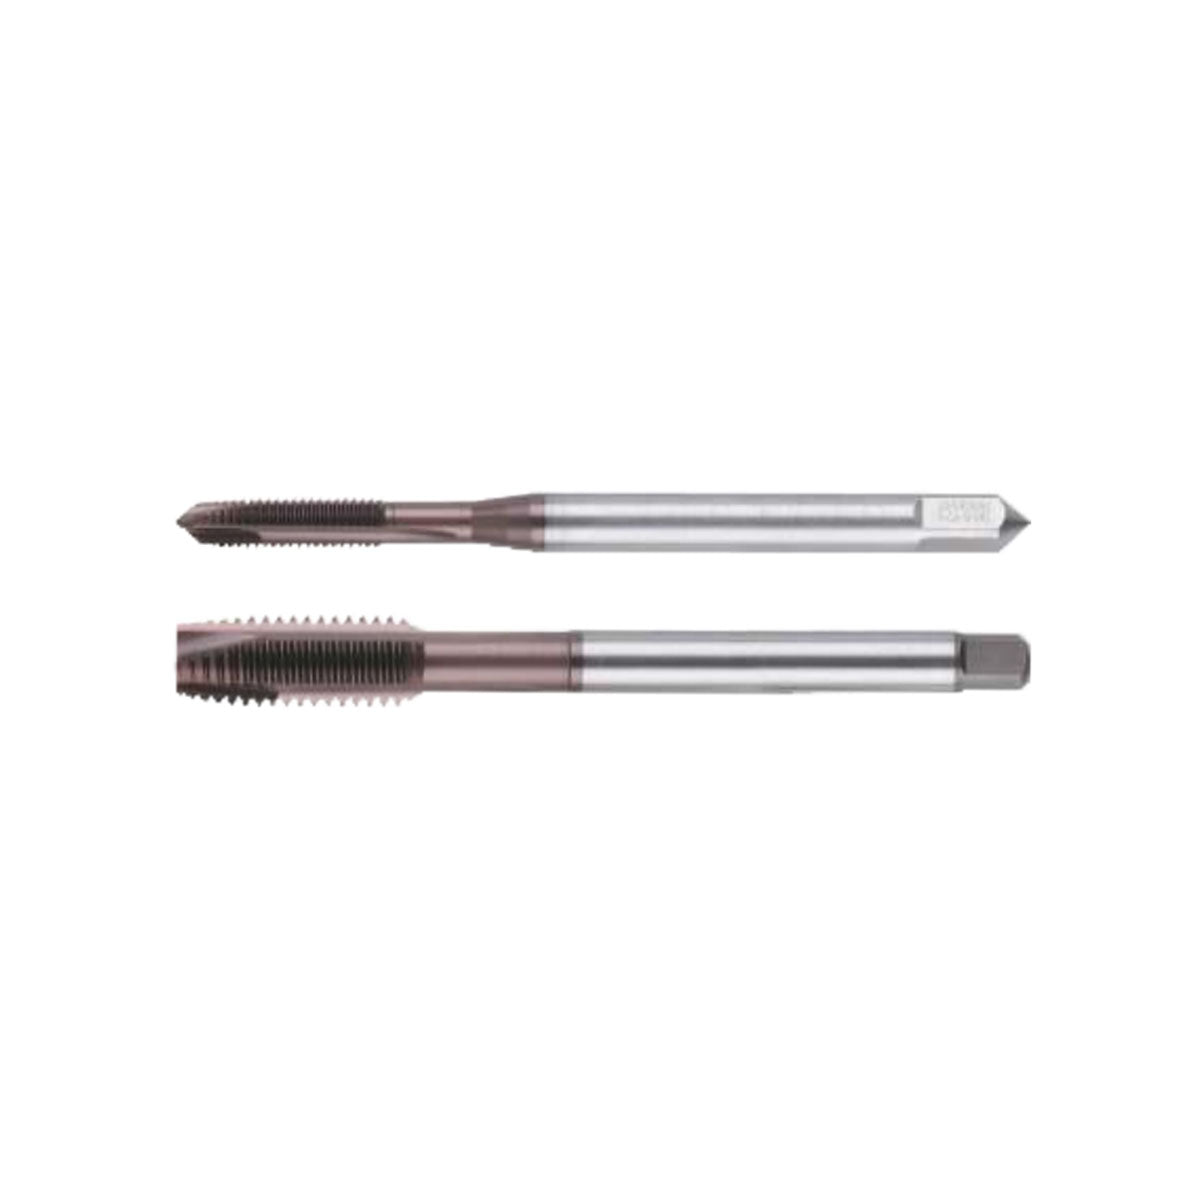 S-POT (M2~M10×0.4~1.5) MP020480 Spiral pointed taps with long shank - Makotools Industrial Supply Tools for Metal Cutting